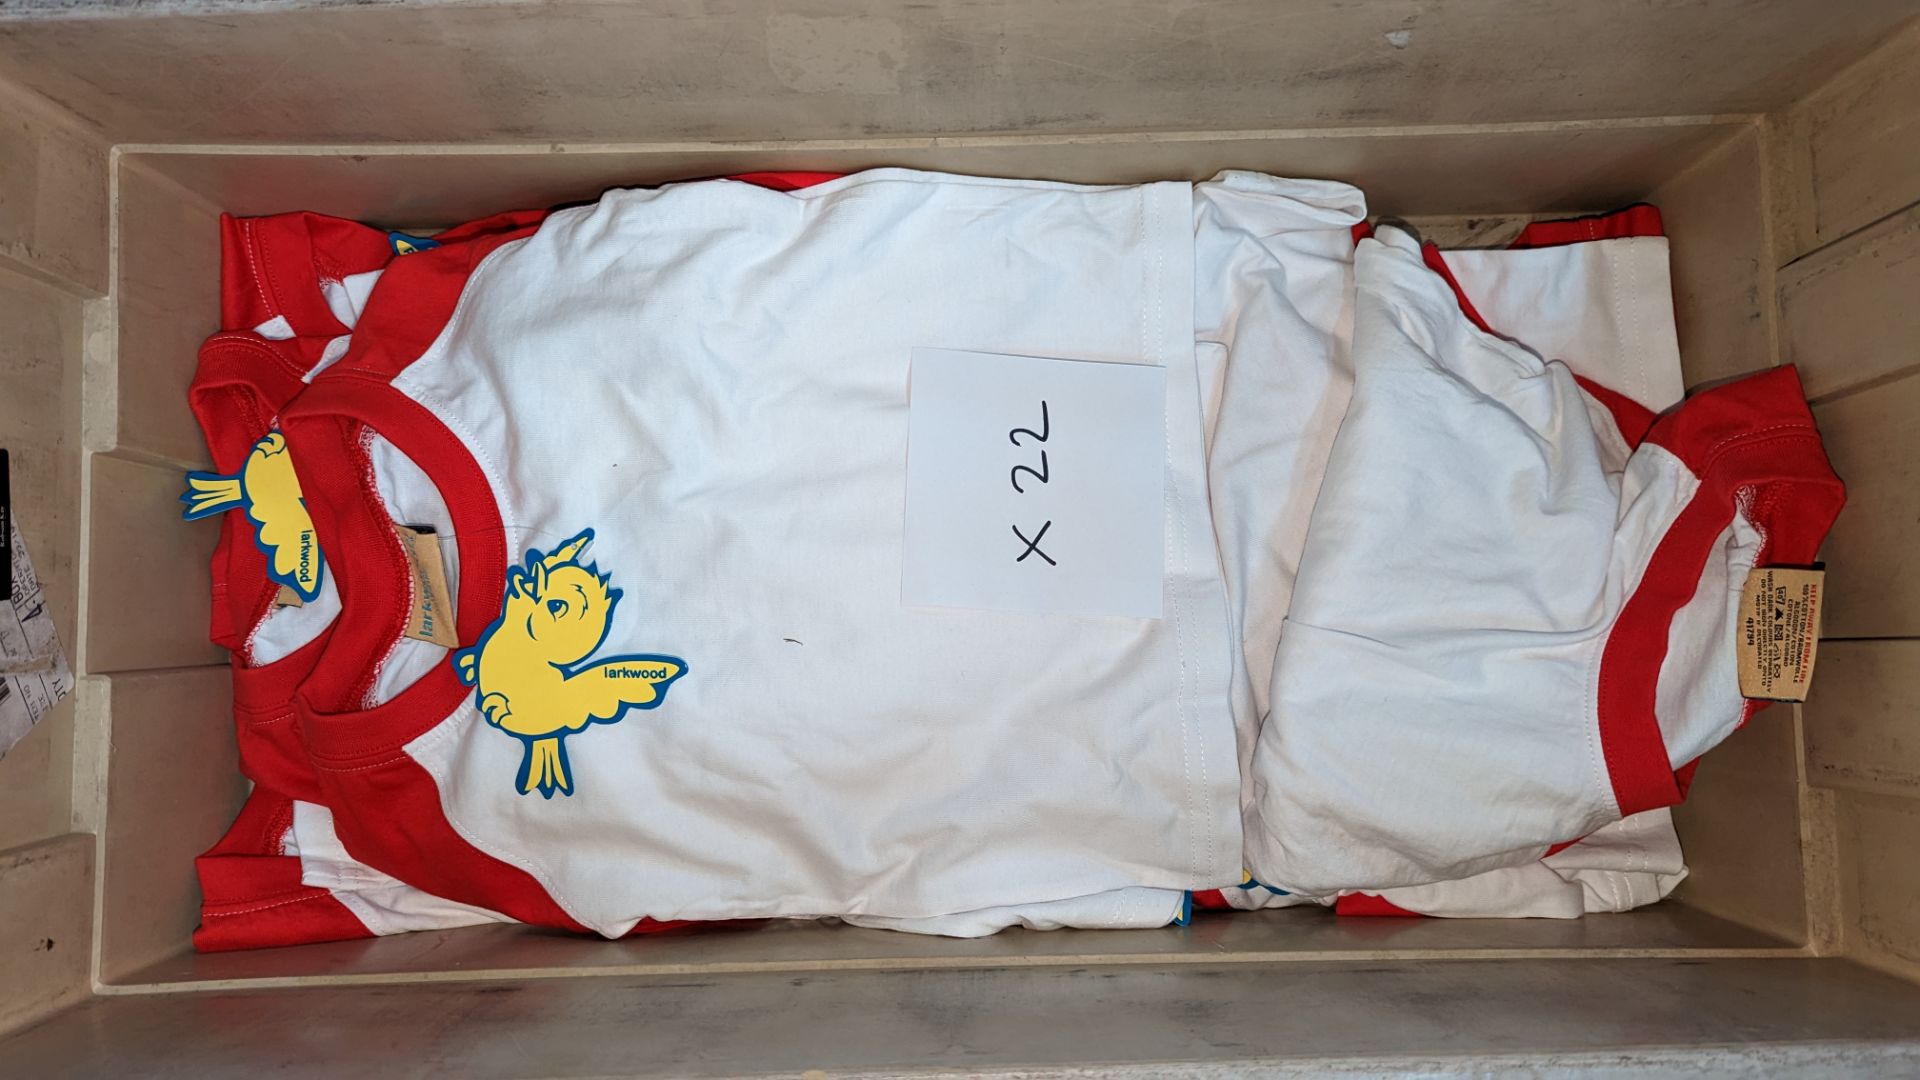 22 off Larkwood baby's long sleeve t-shirts each with white body & red sleeves in assorted sizes - c - Image 3 of 3